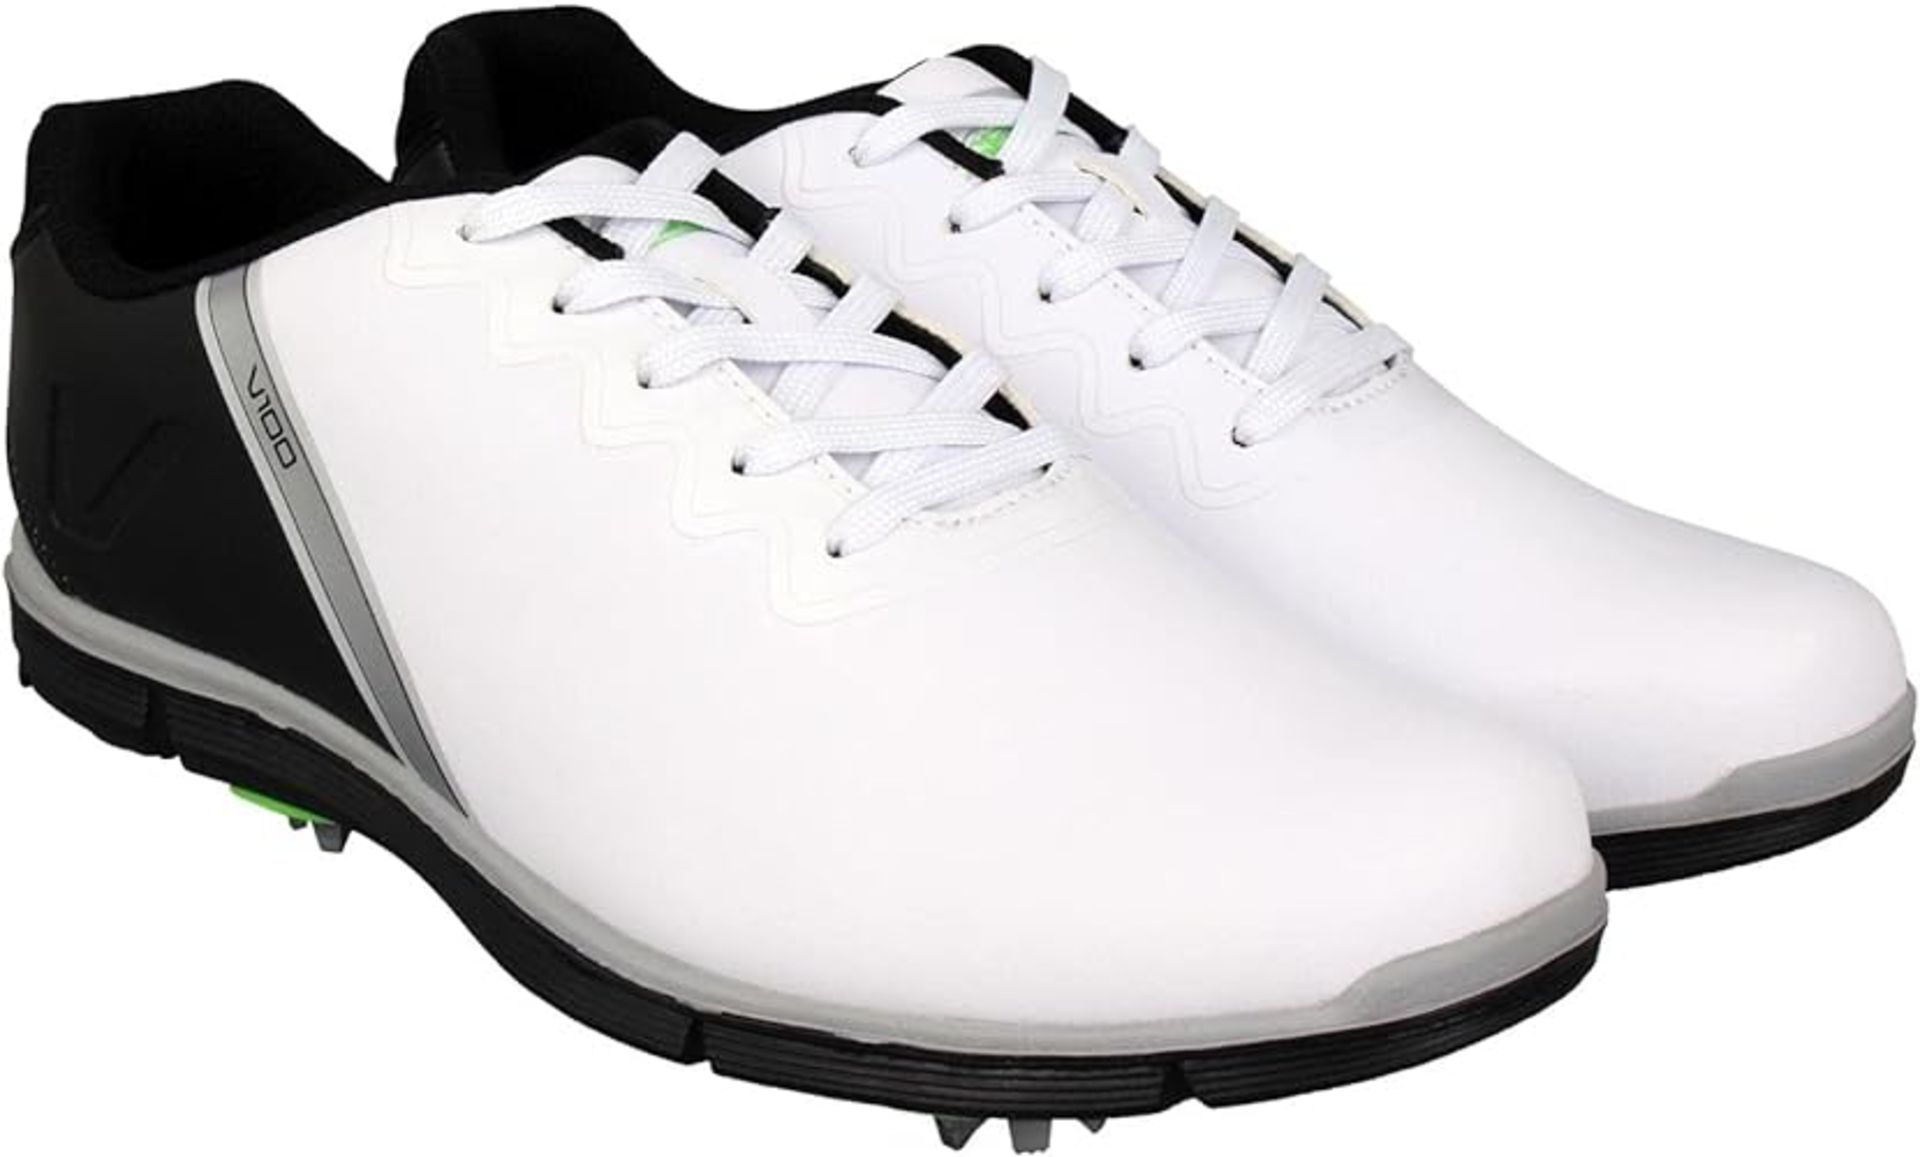 2 X BRAND NEW PAIRS OF SLAZENGER V100 PROFESSIONAL GOLF SHOES SIZE 8 RRP £89 EACH S1RA - Image 3 of 5